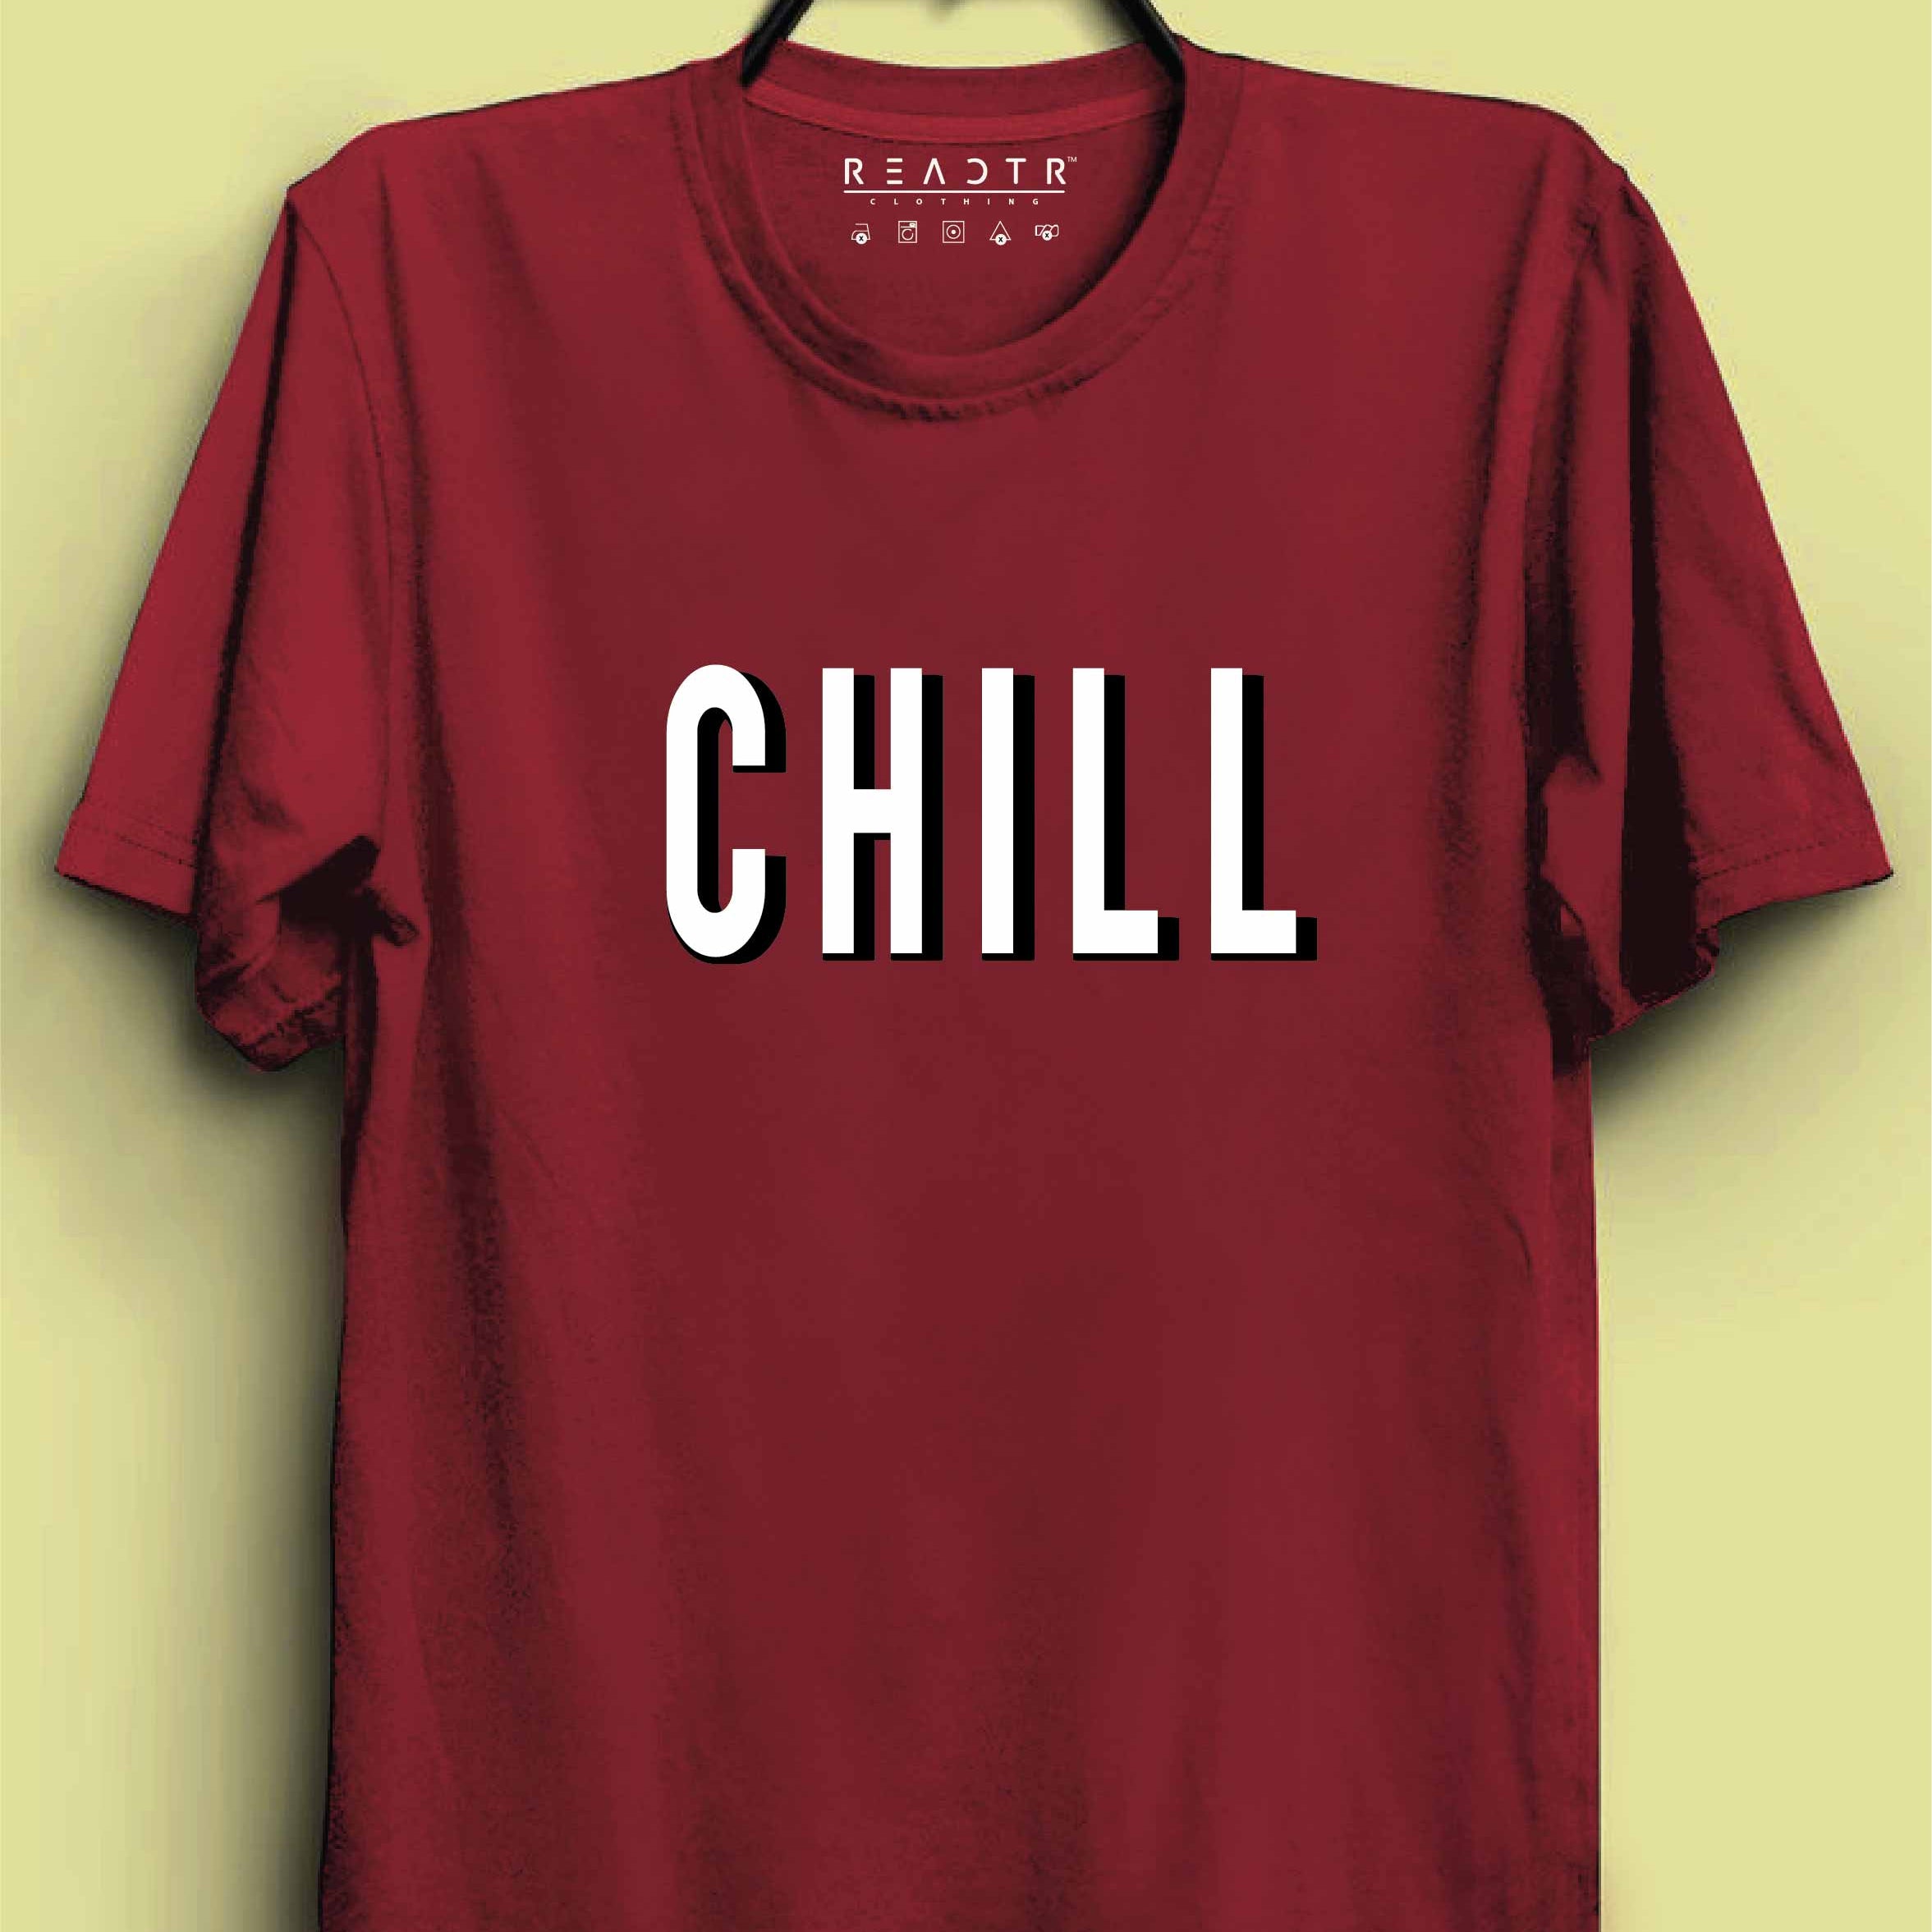 Chill Reactr Tshirts For Men - Eyewearlabs